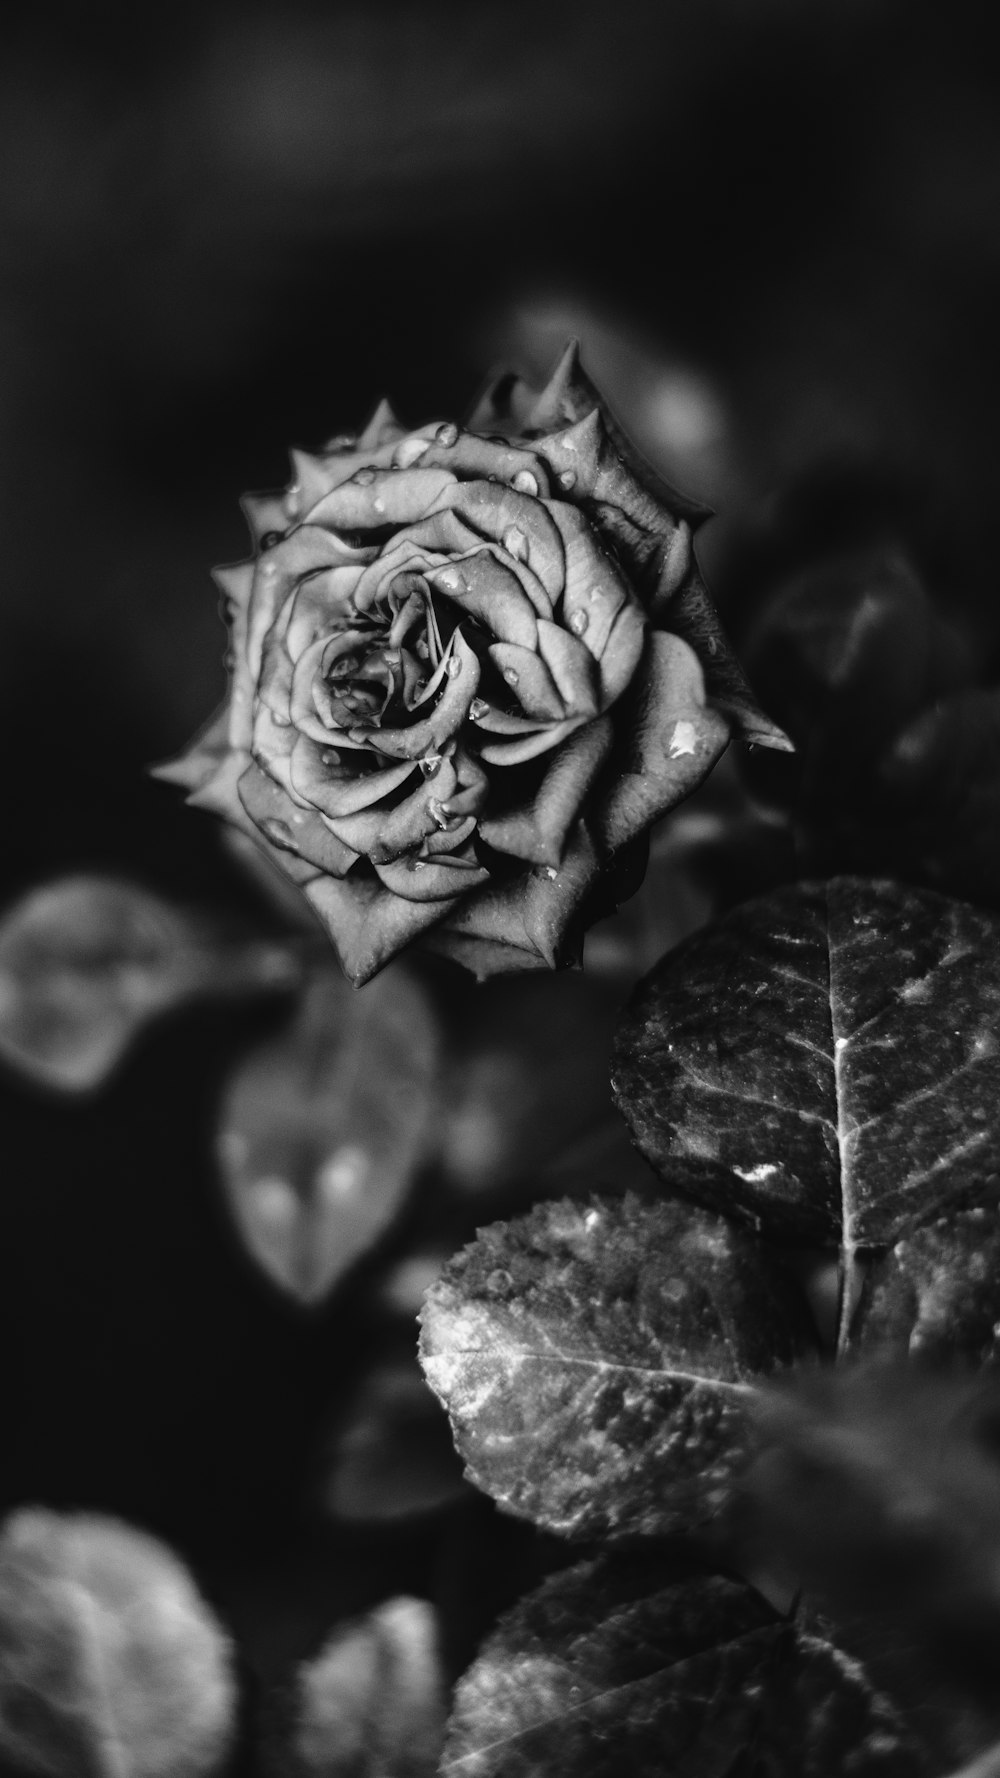 An Incredible Compilation of Over 999 Black and White Images in Stunning Full 4K Resolution